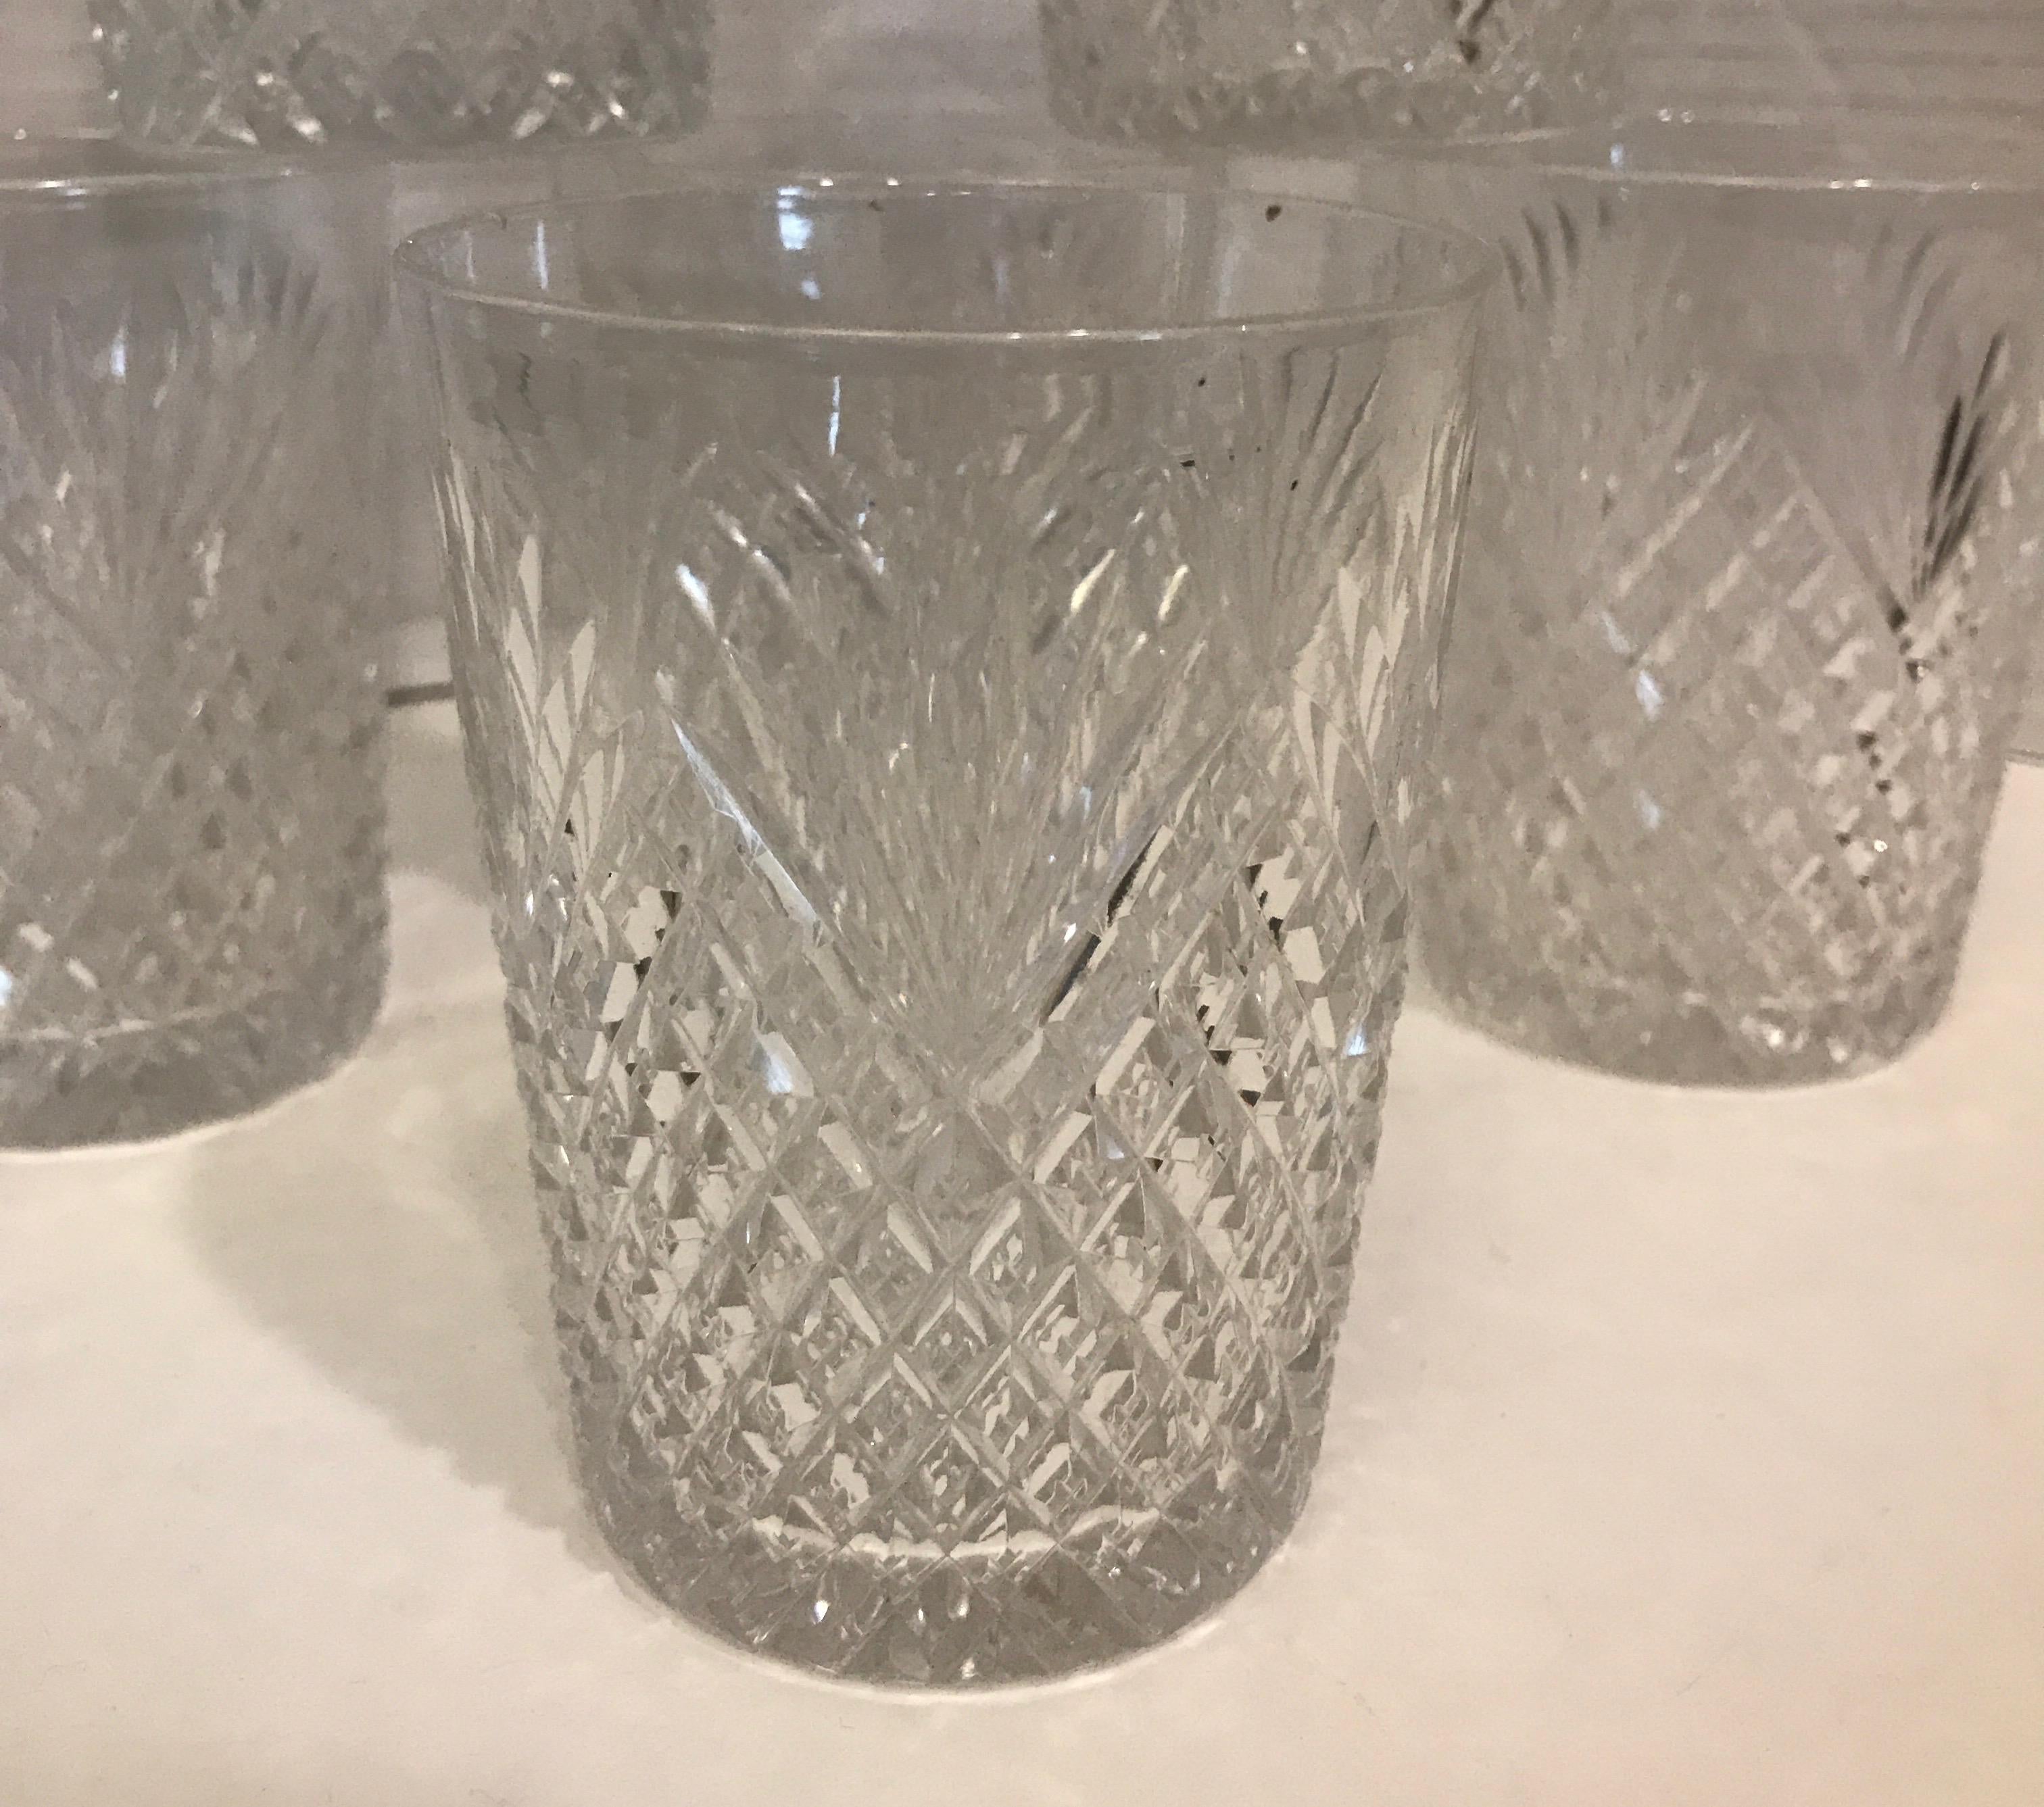 Six hand cut crystal diamond and fan pattern whisky rock glasses, The mirror shine cuts with mostly a diamond pattern with a fan cut at the top. These are individually made as the thickness of each glass is slightly different and the cuts are hand